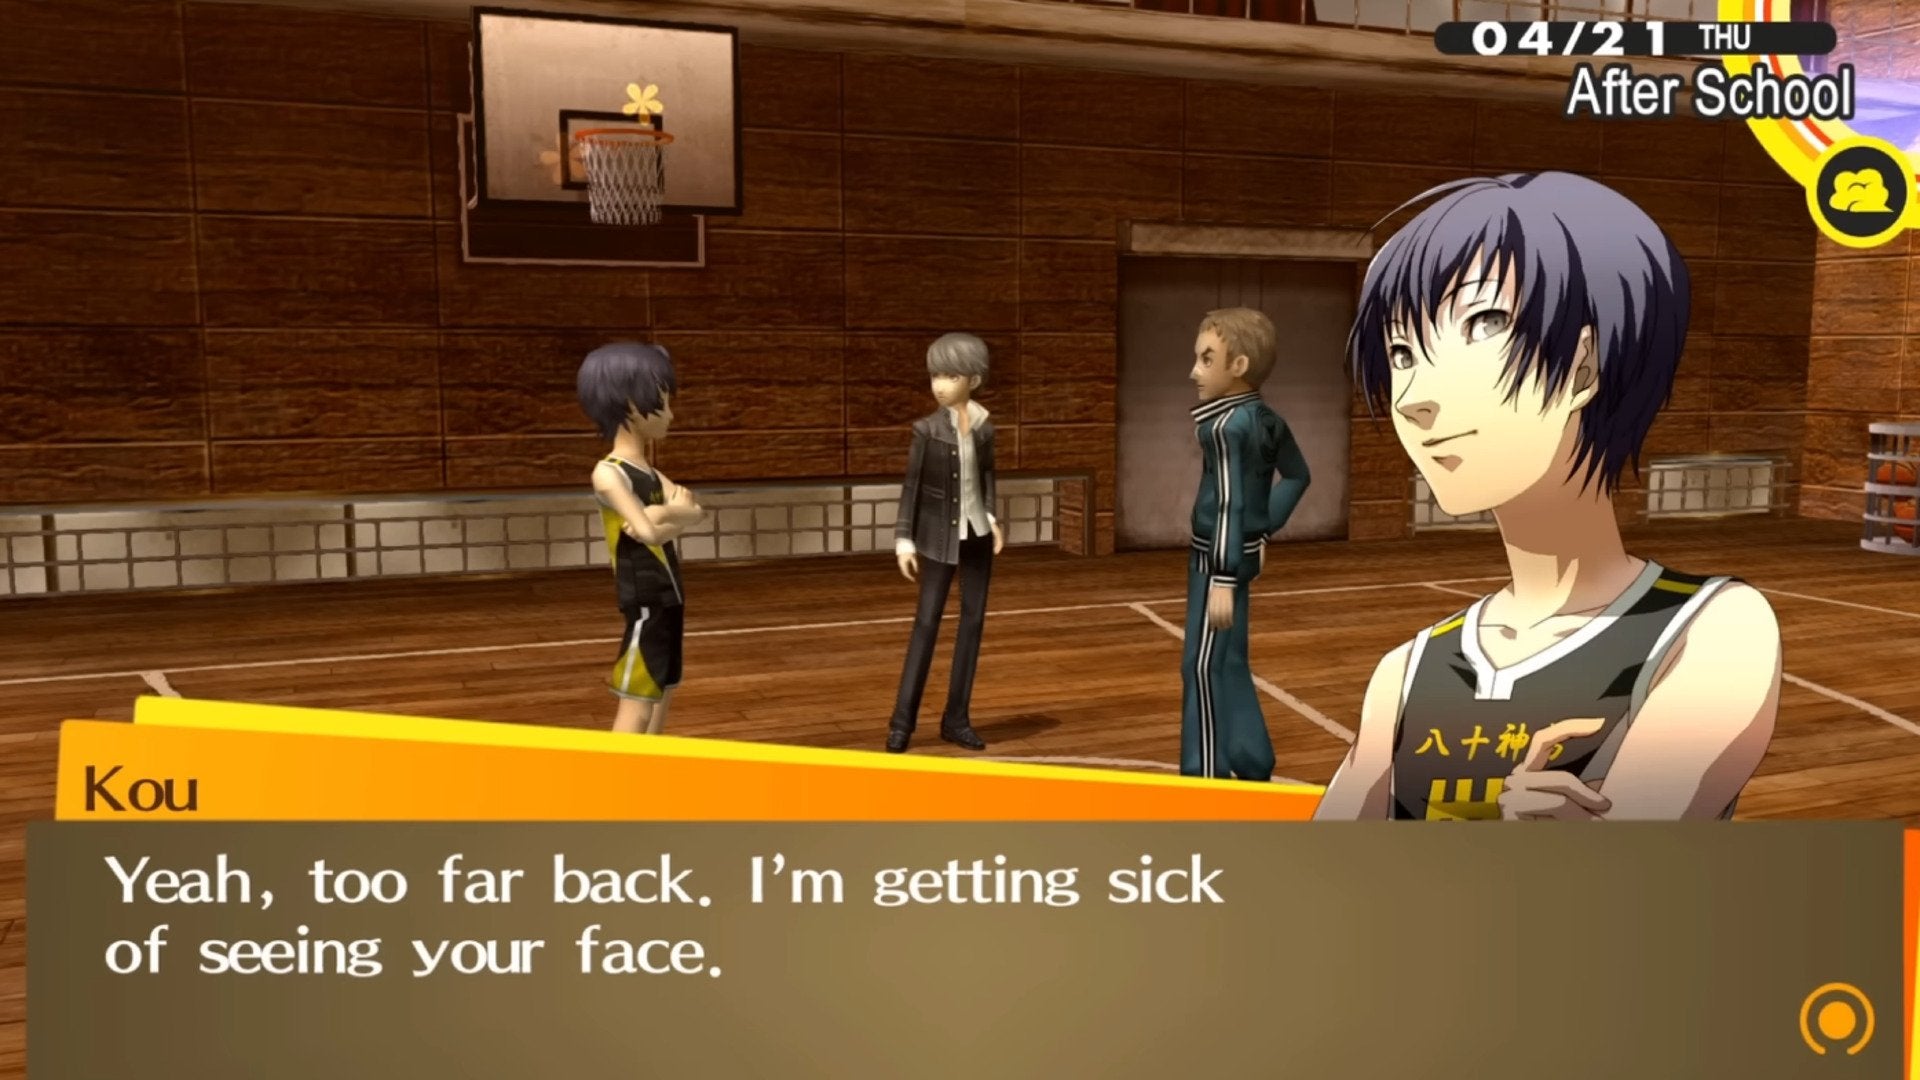 Kou, Daisuke, and the protagonist of Persona 4 Golden chatting in the school gym.